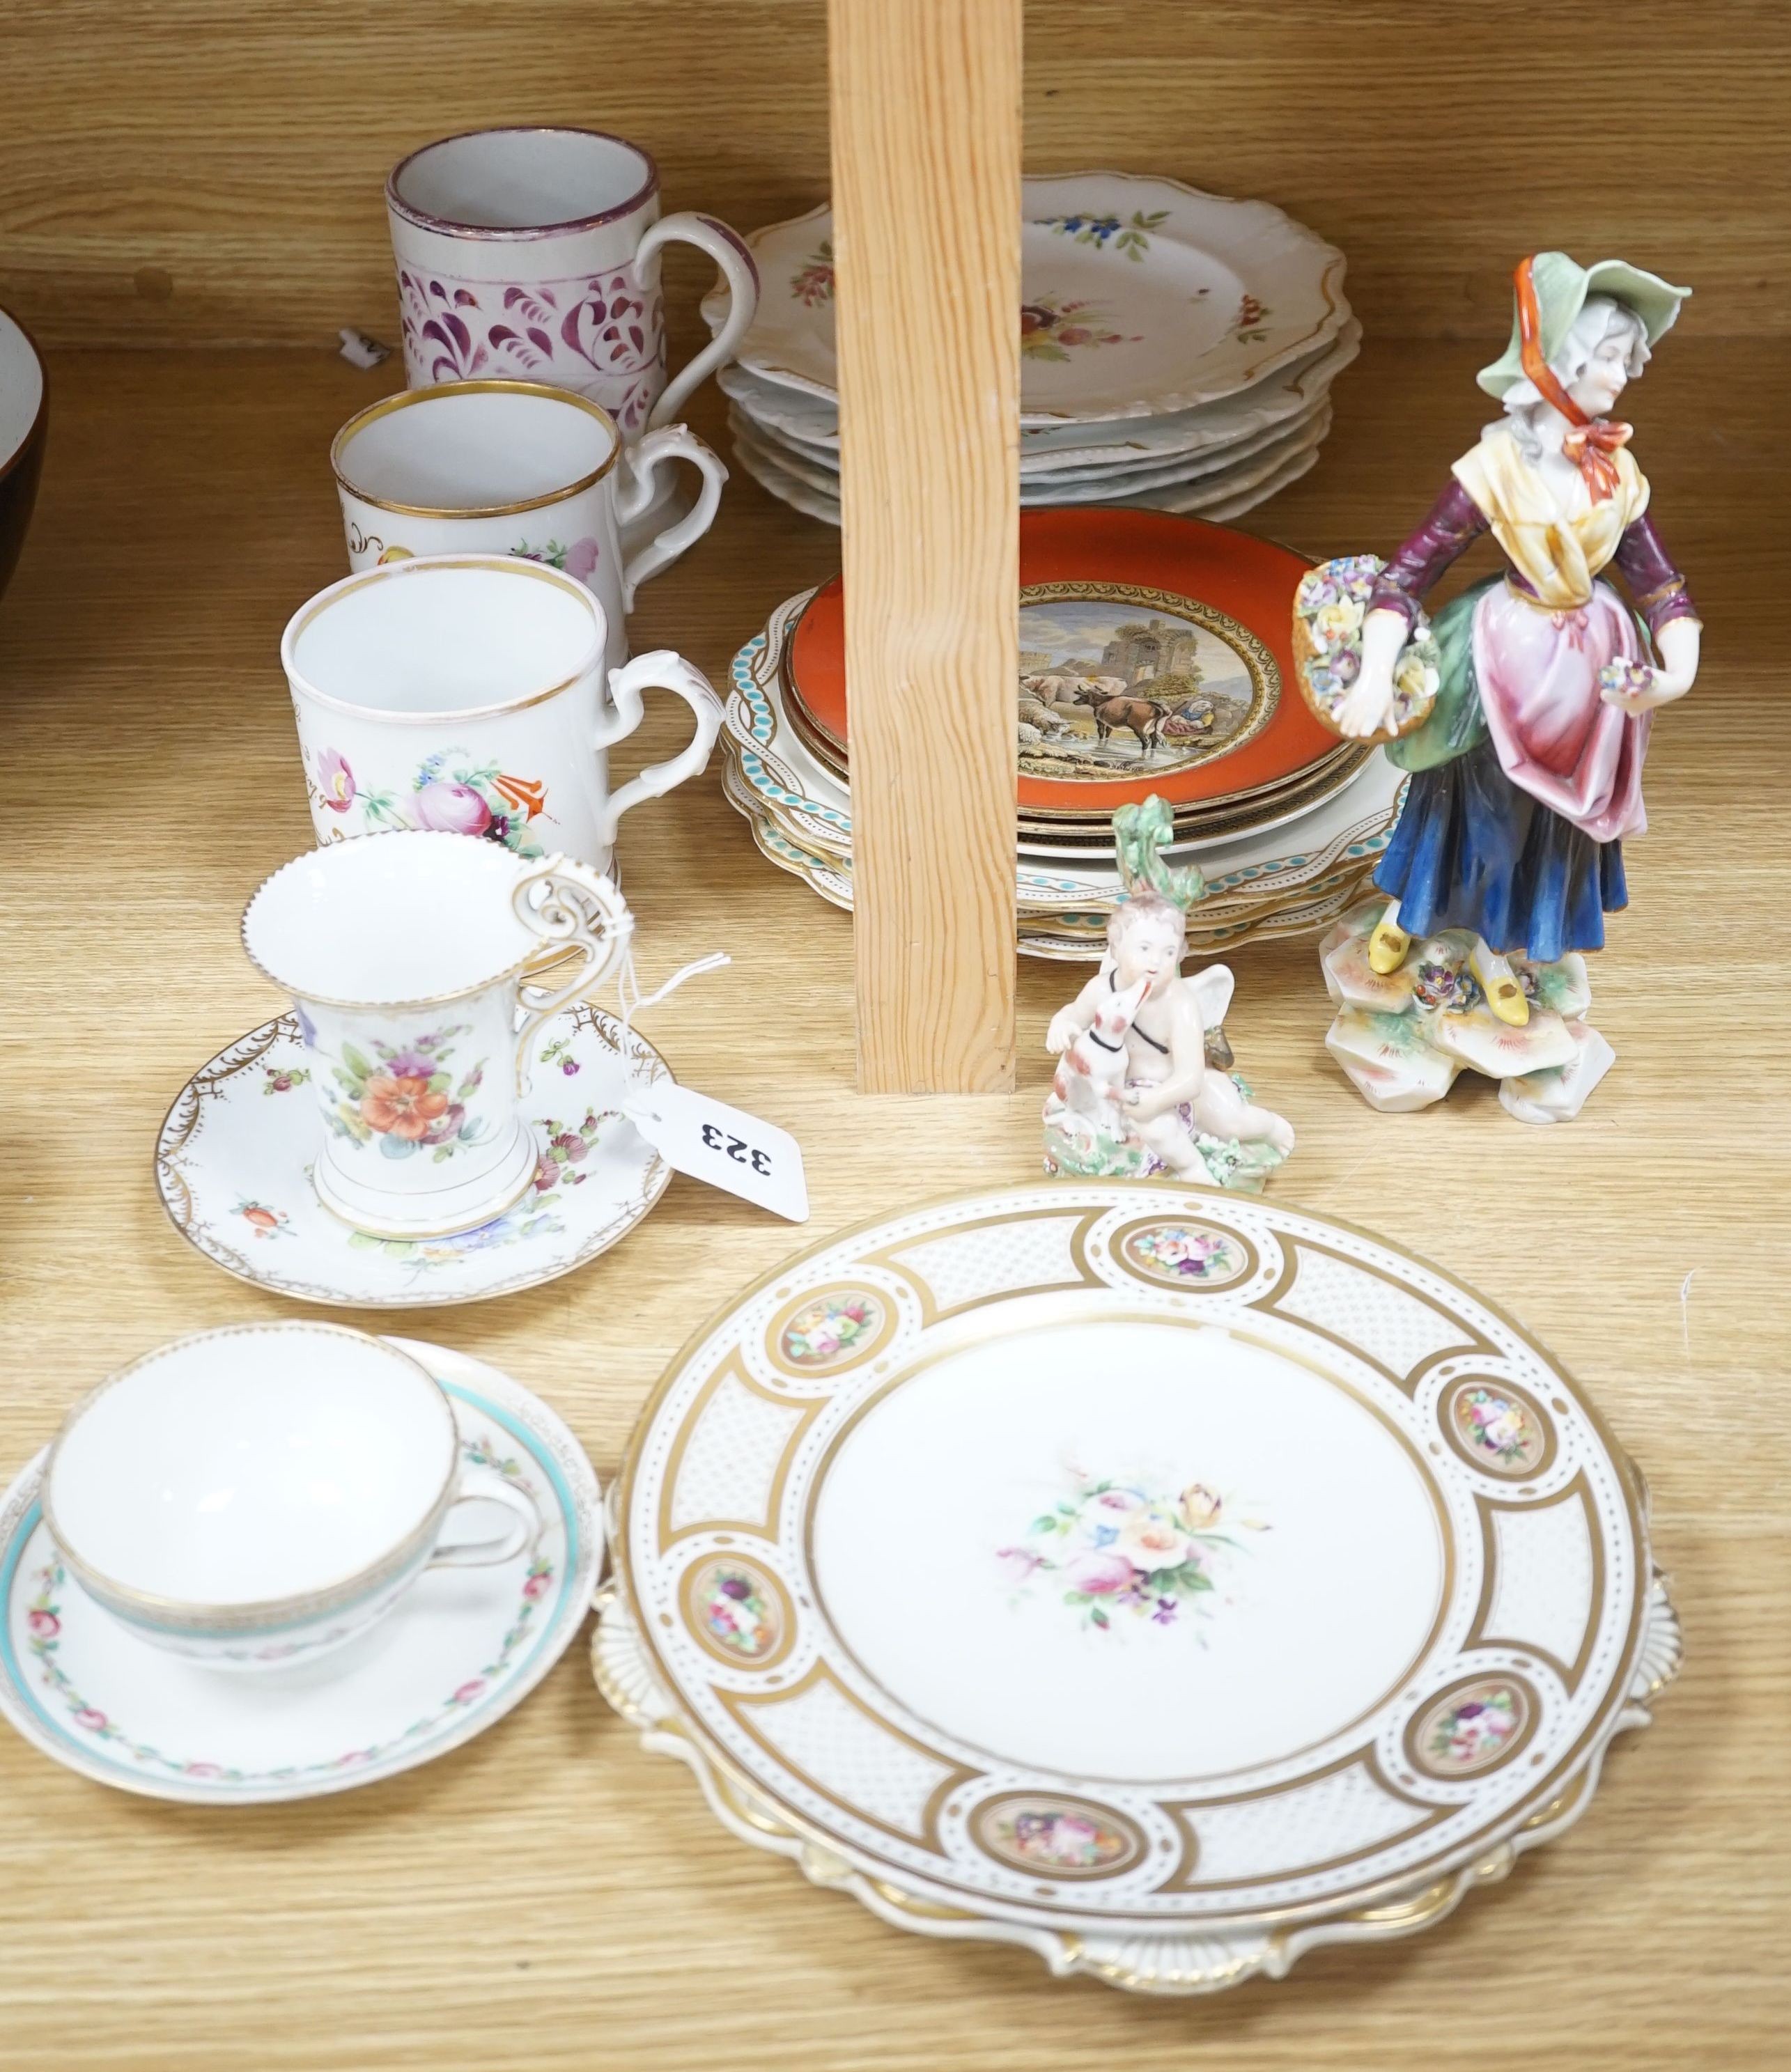 A collection of 19th century English porcelain plates and mugs and a Derby Cupid group, c.1775